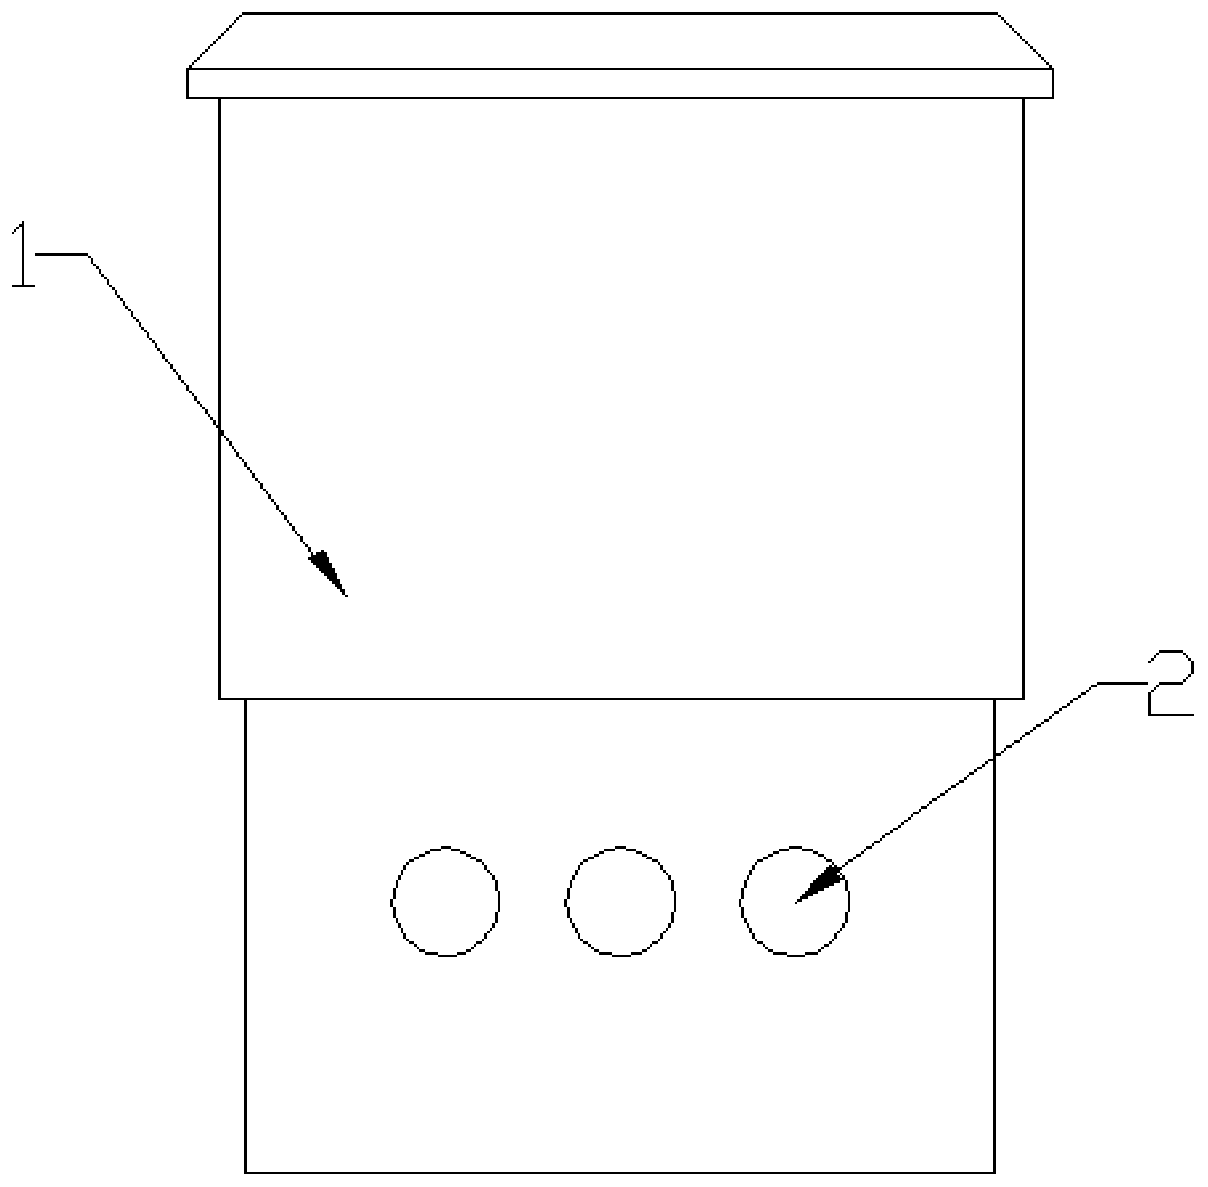 A cable branch box convenient for wiring